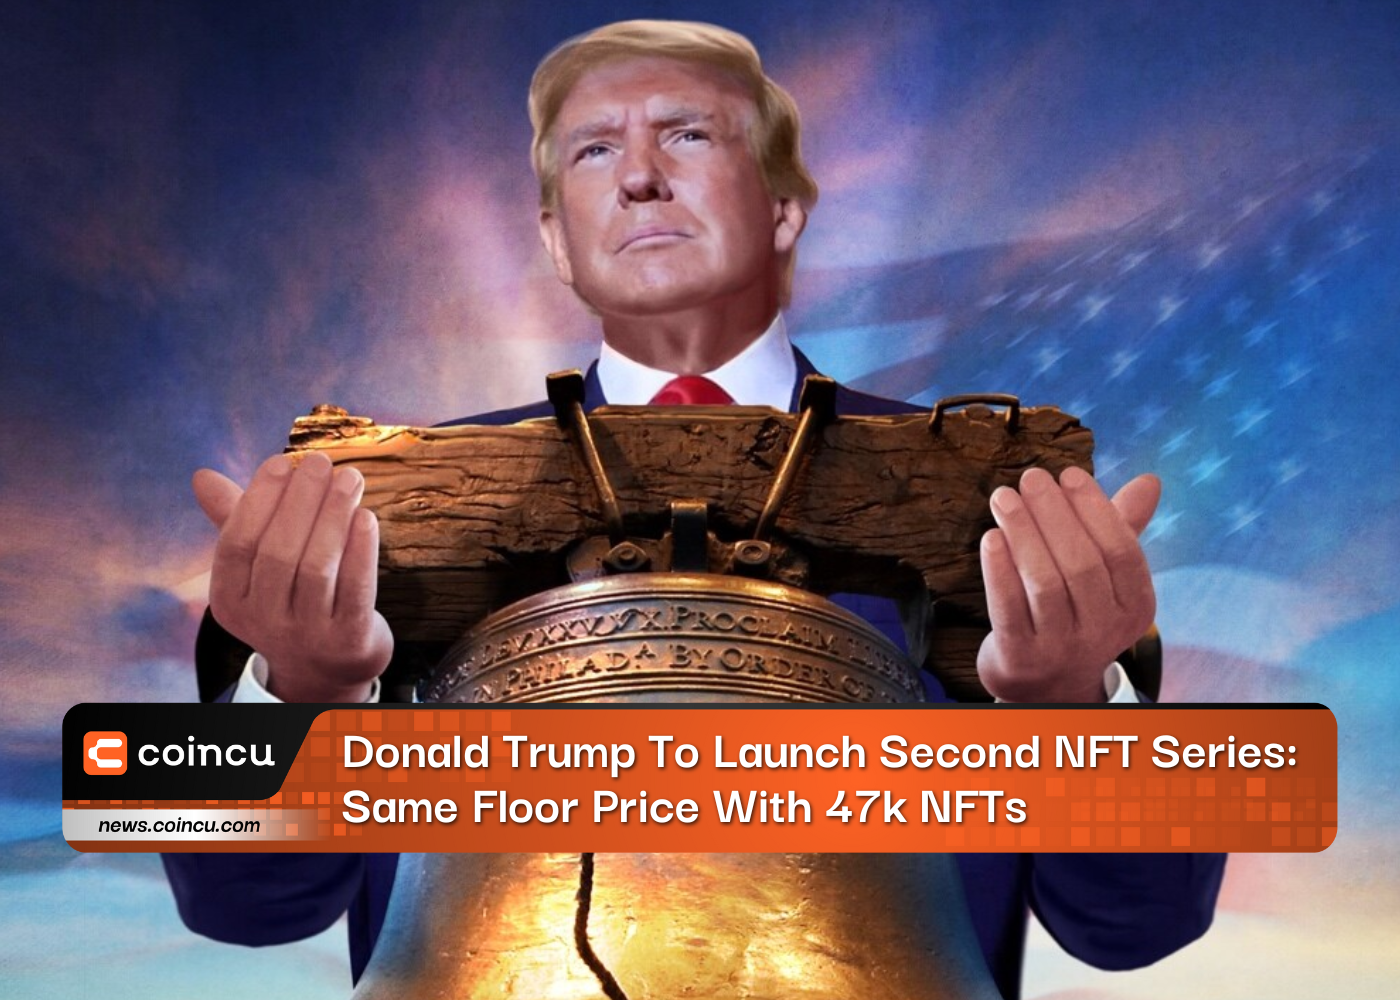 Donald Trump To Launch Second NFT Series: Same Floor Price With 47k NFTs